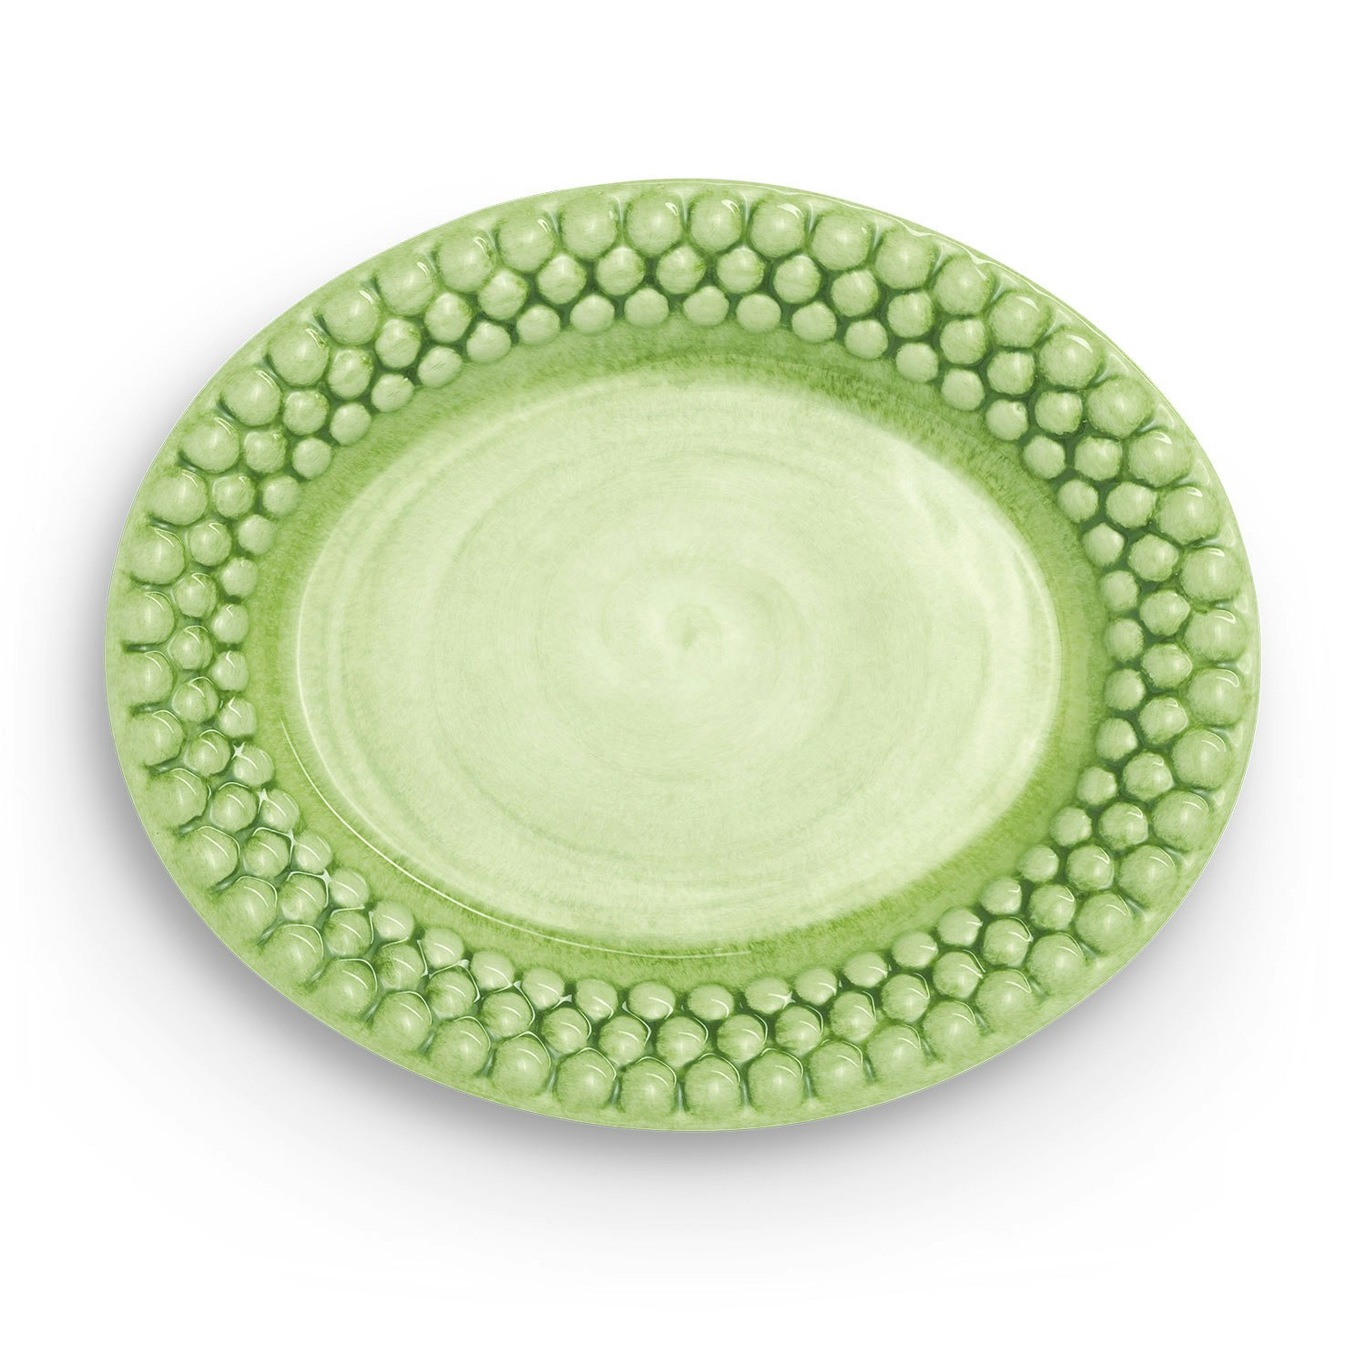 Bubbles Oval Plate 20 cm, Green